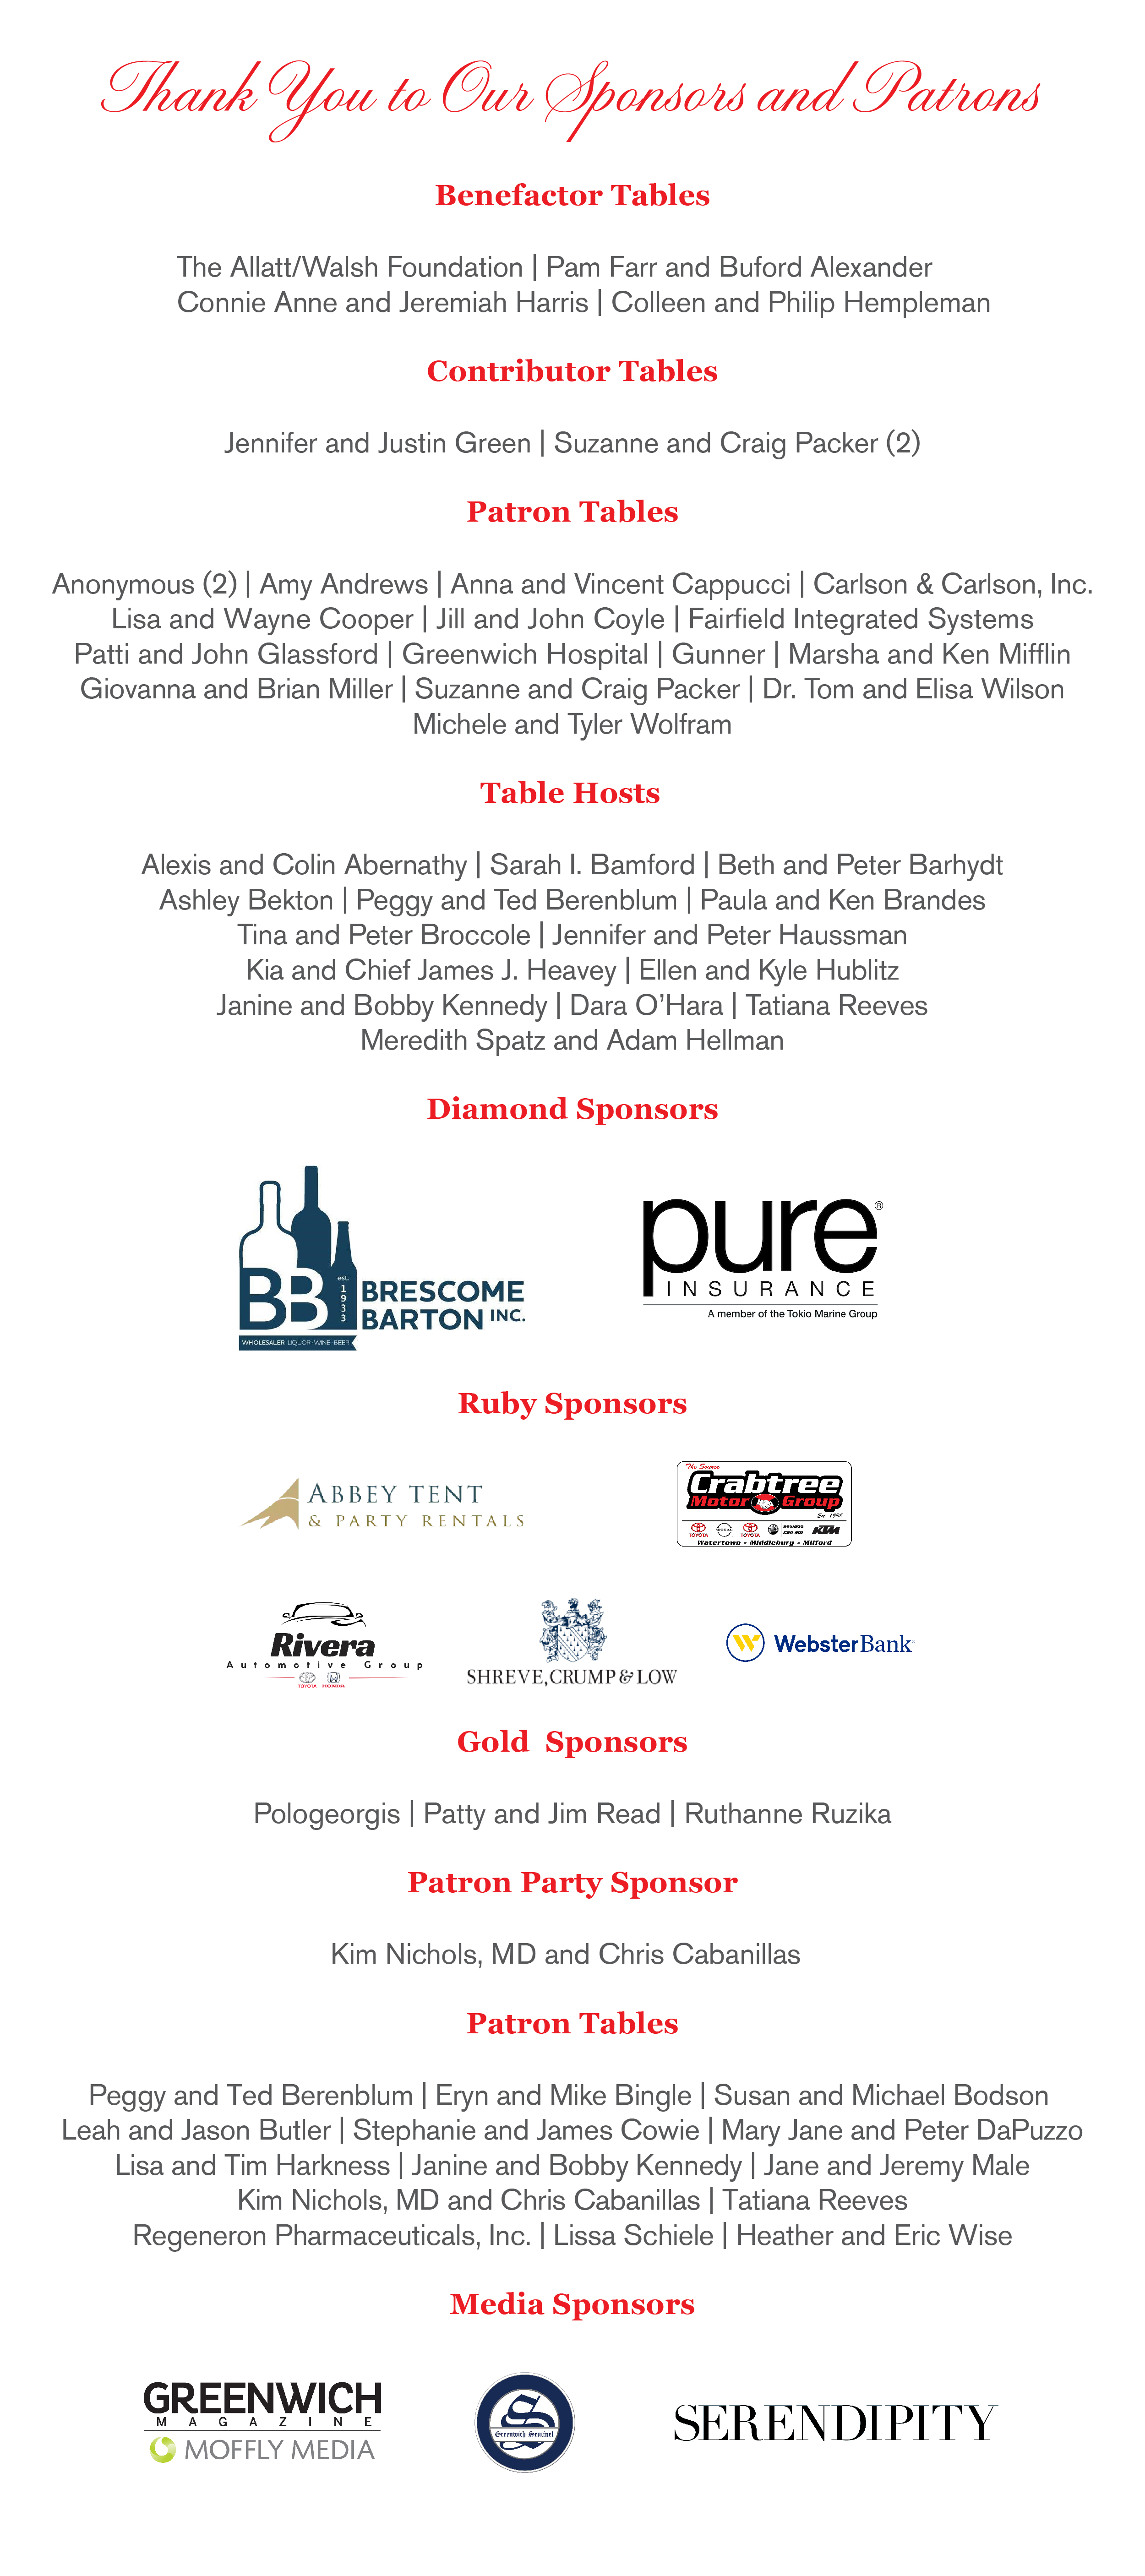 List of sponsors and patrons for the ball